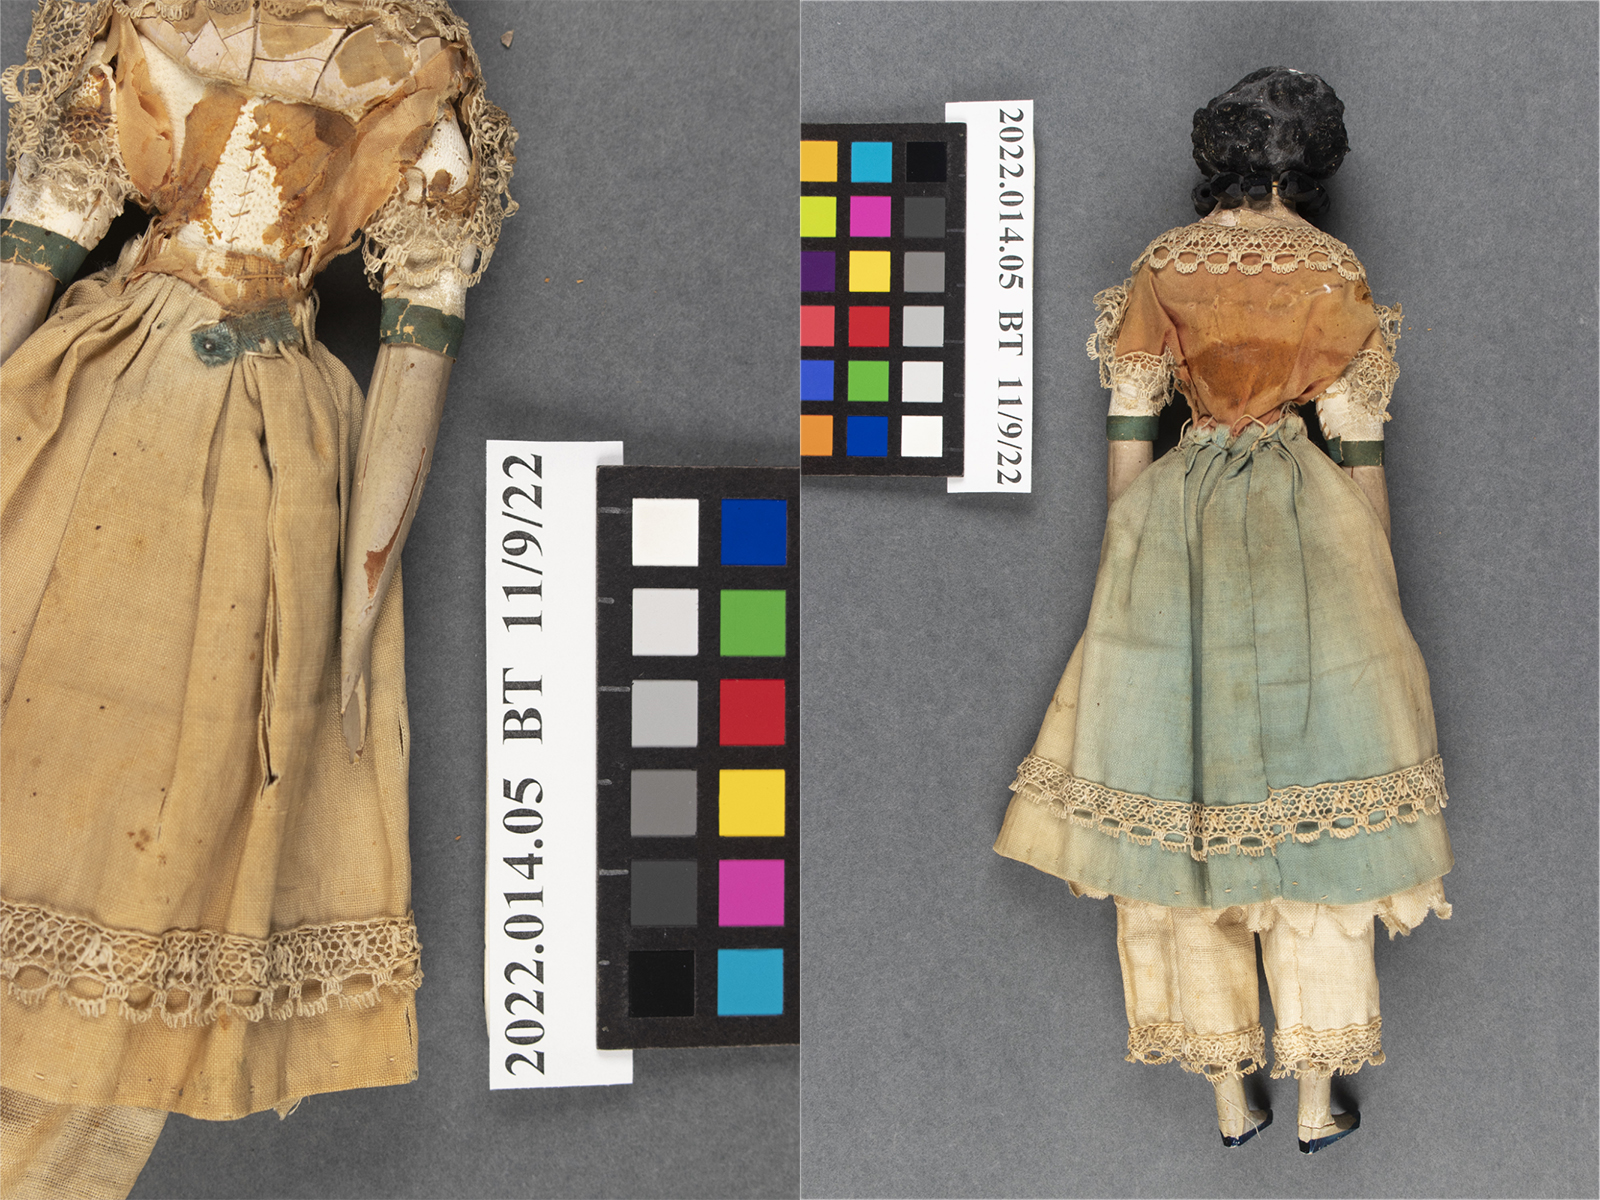 In this image, you can see that Lucy’s cotton dress was faded, stained, and developing splits along creased pleats. The skirt was originally blue and the bodice much darker; sections of this color remain on the back side of the doll, which had been more protected from light exposure.